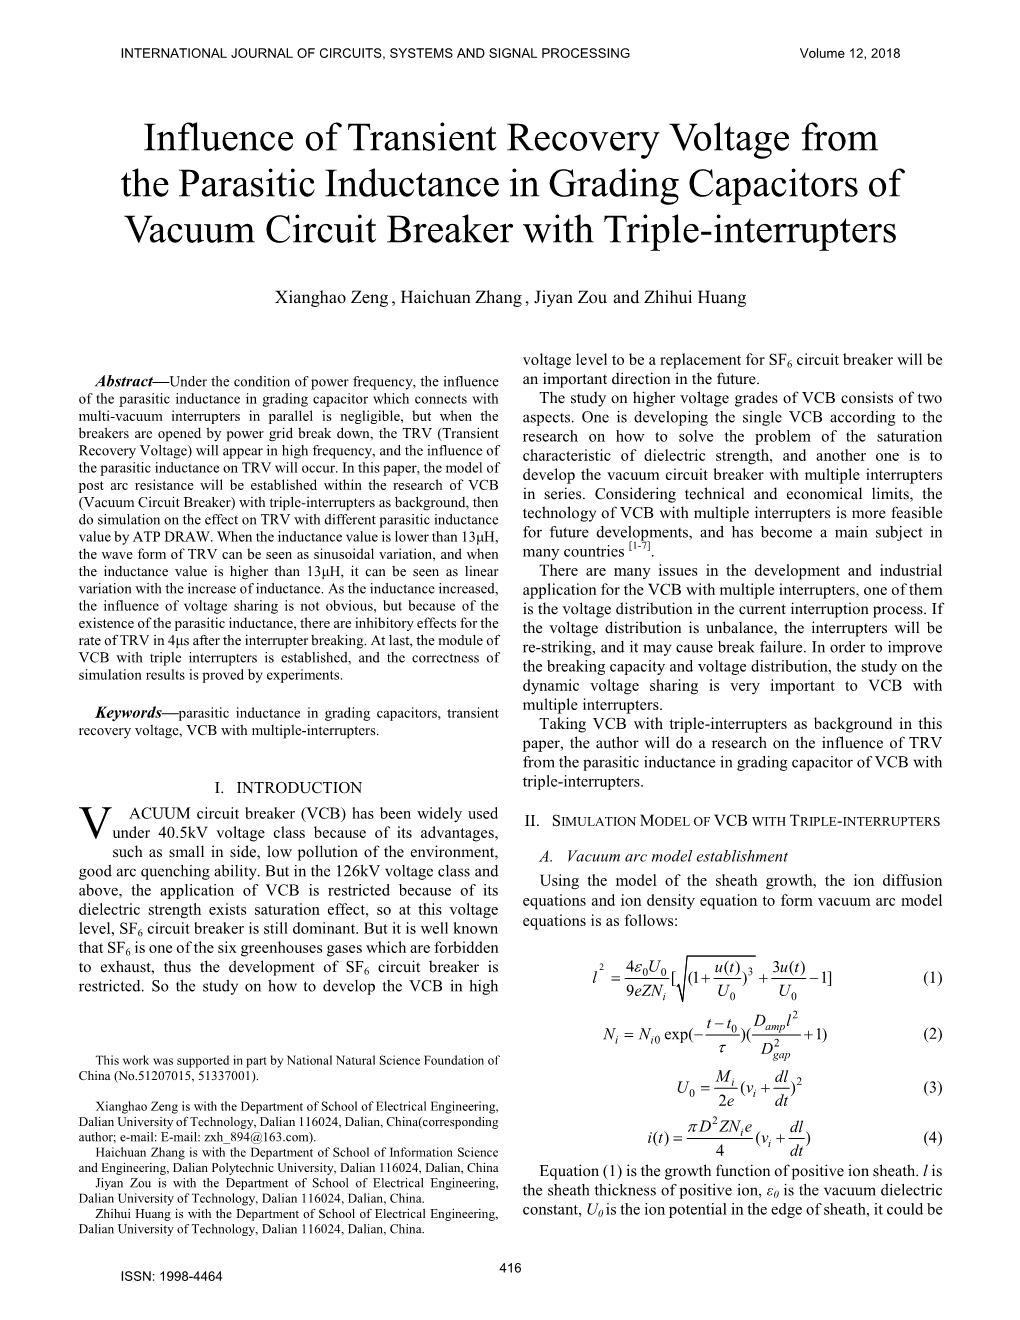 Influence of Transient Recovery Voltage from the Parasitic Inductance in Grading Capacitors of Vacuum Circuit Breaker with Triple-Interrupters